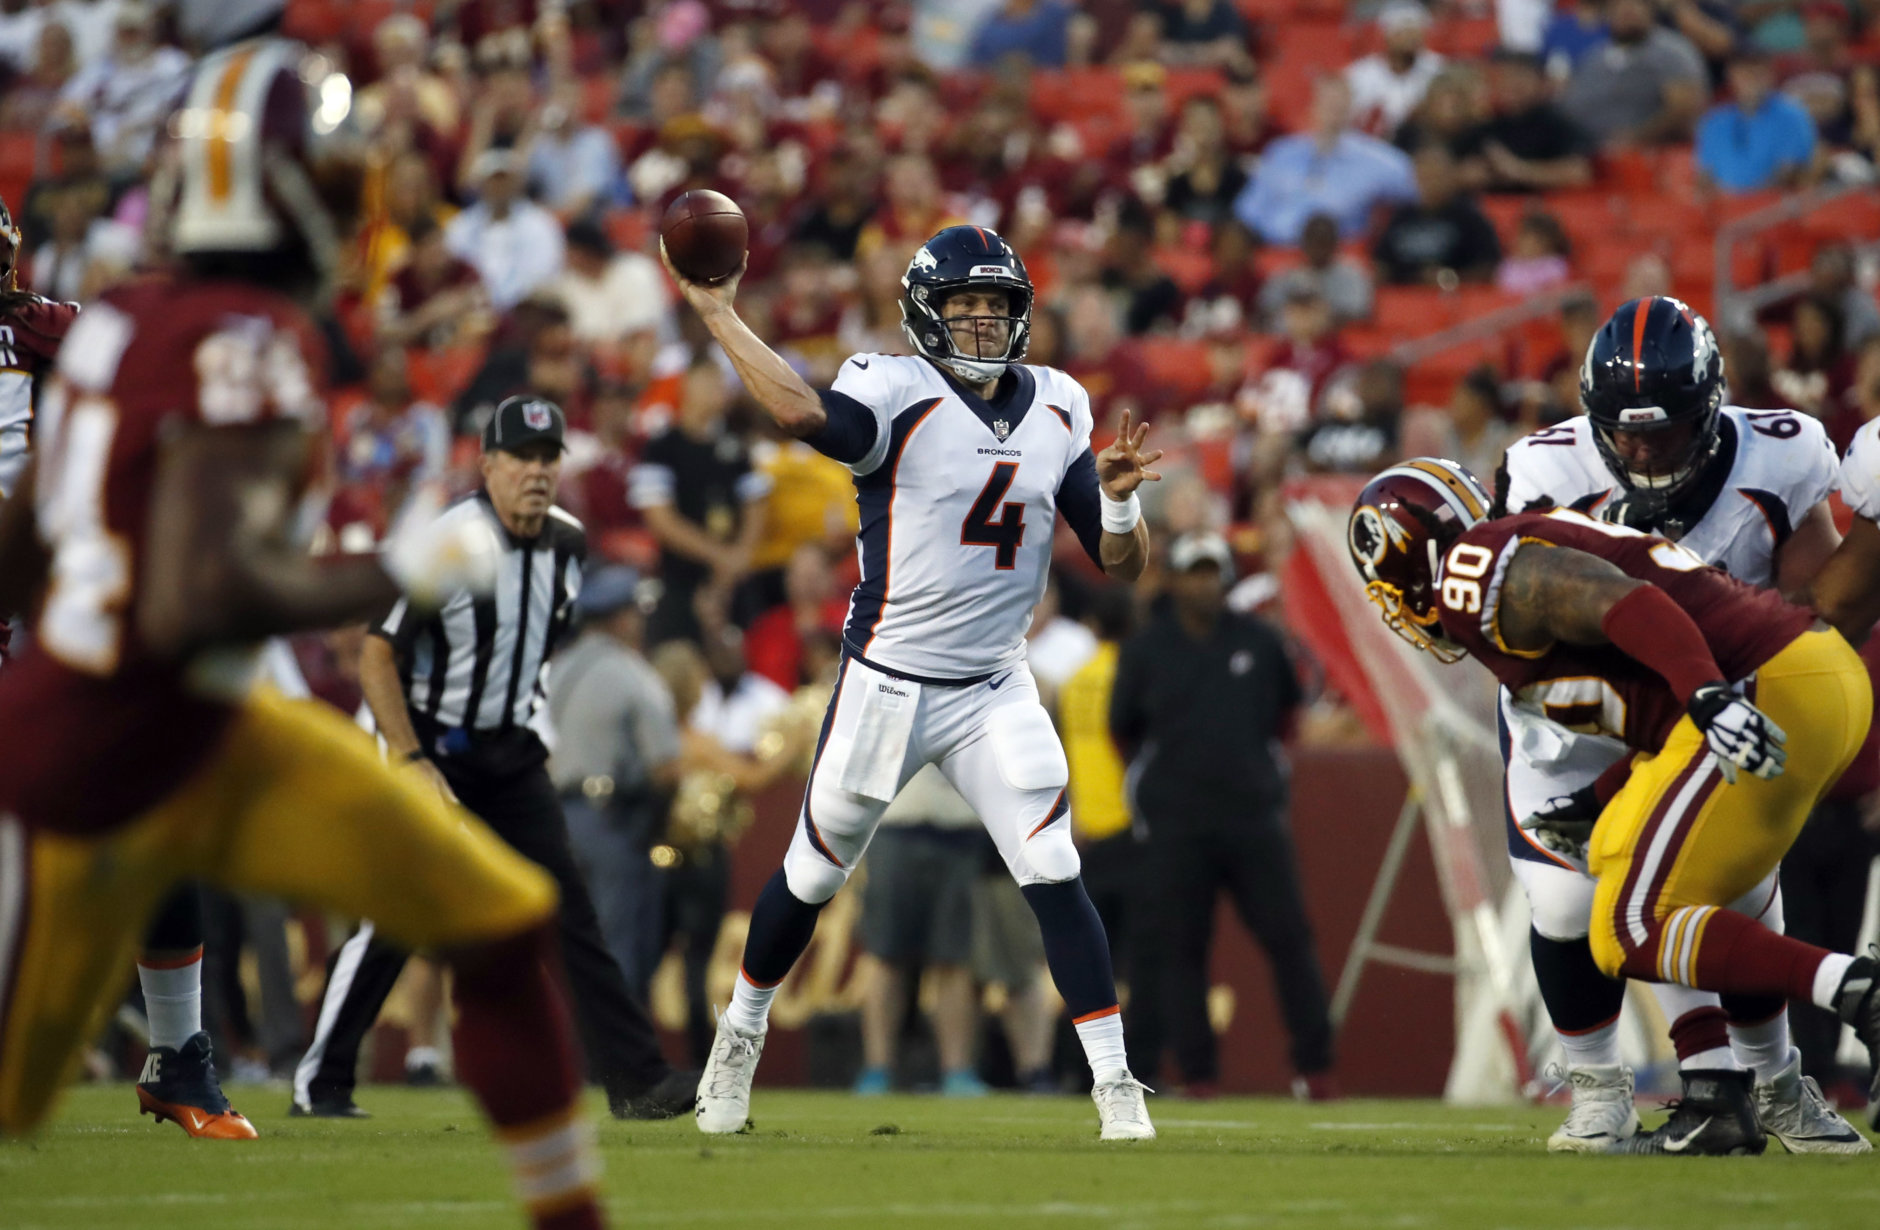 Denver Broncos quarterback Case Keenum (4) throws a pass during the first half of the team's preseason NFL football game against the Washington Redskins on Friday, Aug. 24, 2018, in Landover, Md. (AP Photo/Alex Brandon)